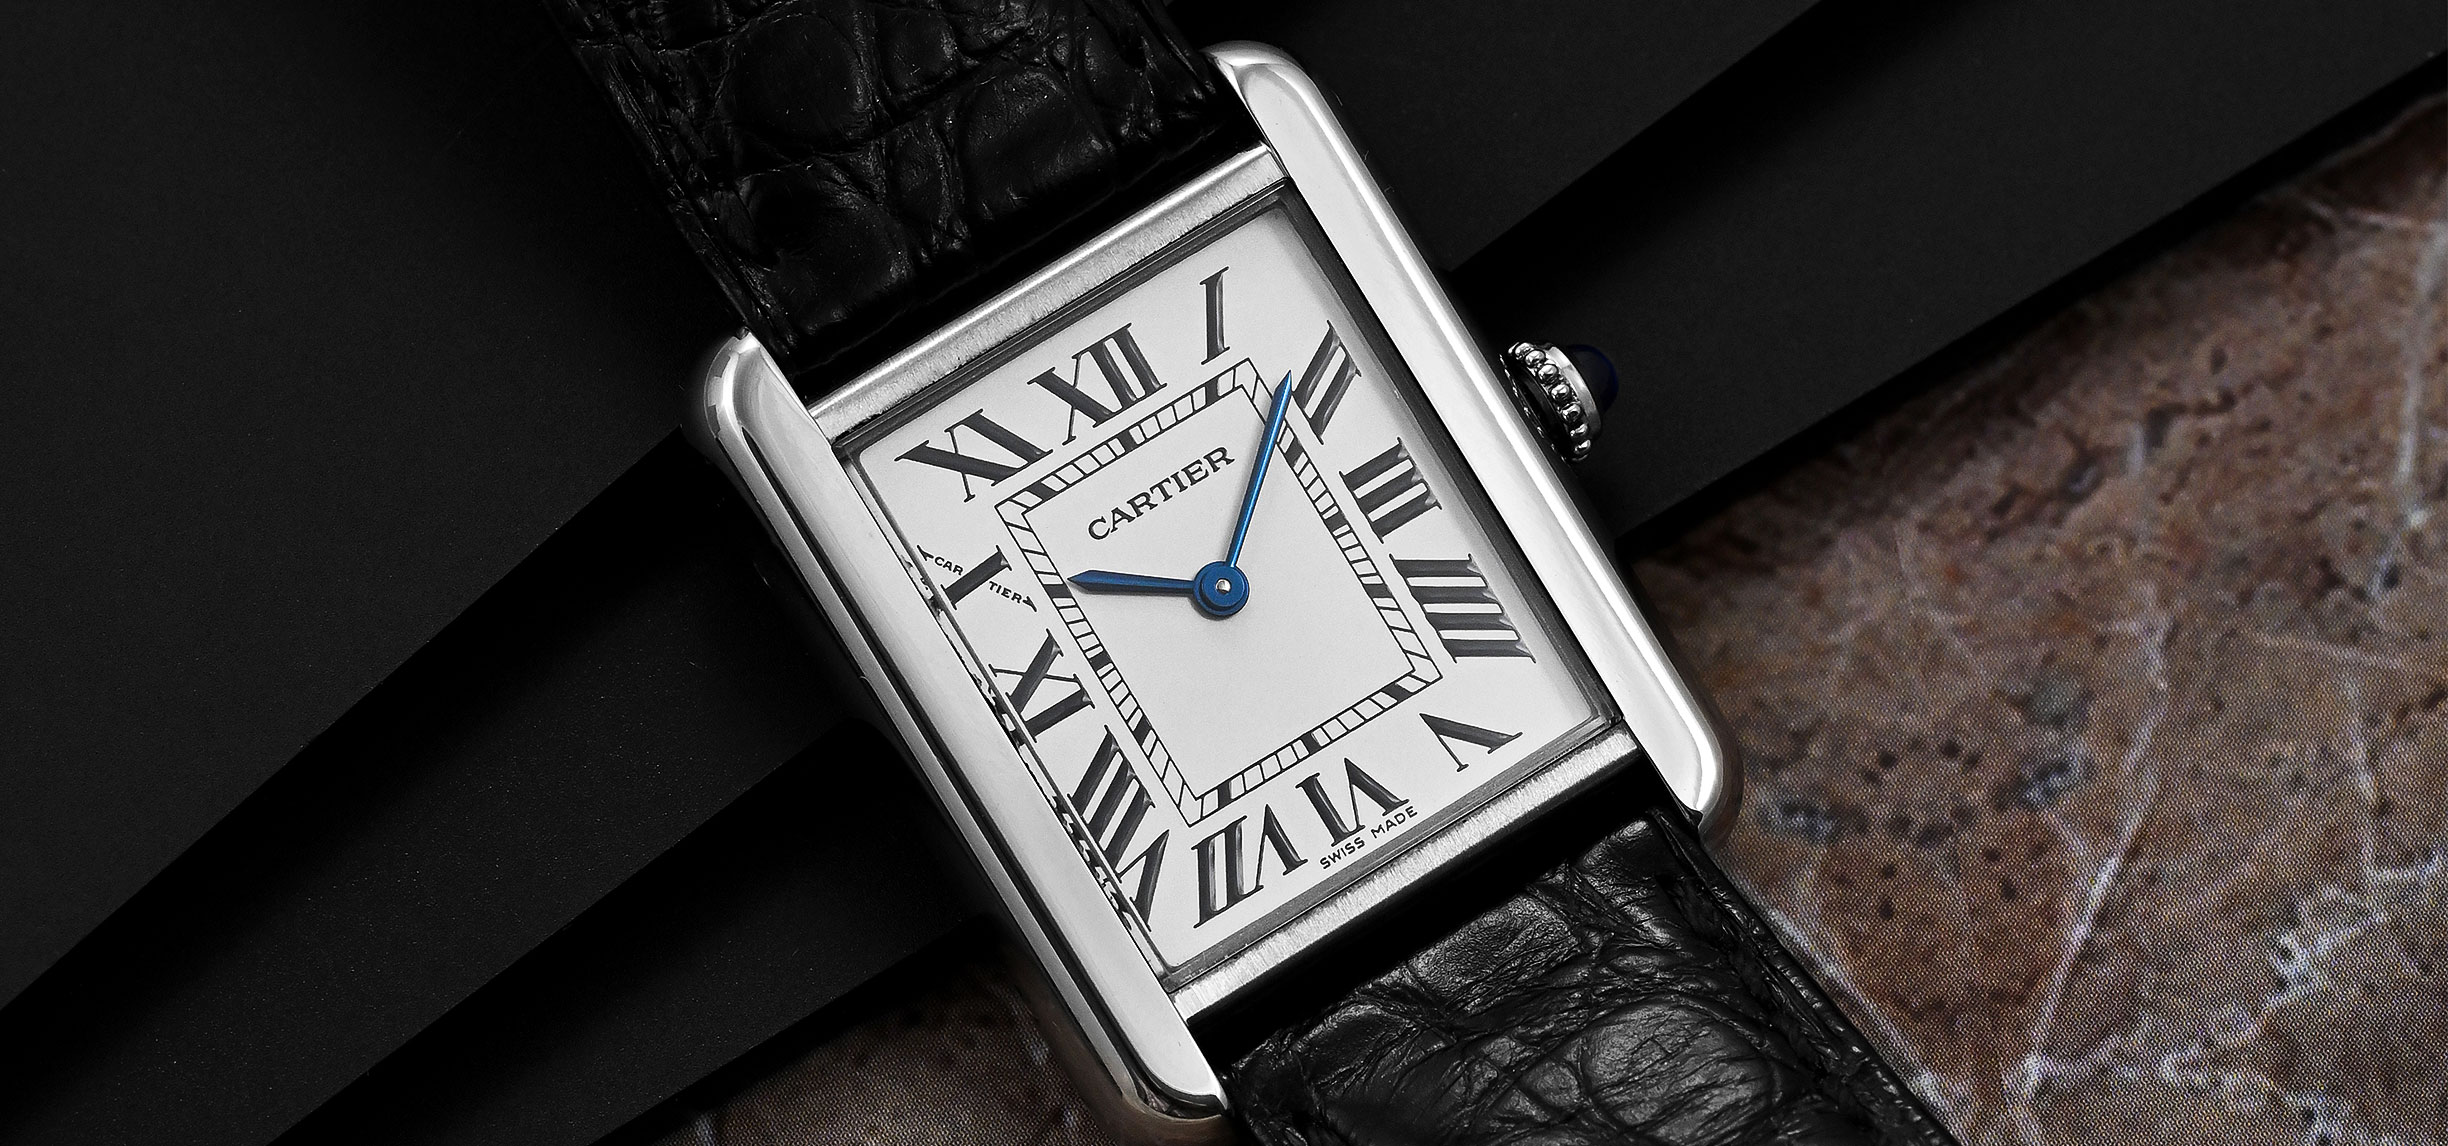 More Than A Century-Old Yet The Most Contemporary Watch We Know – Cartier Tank